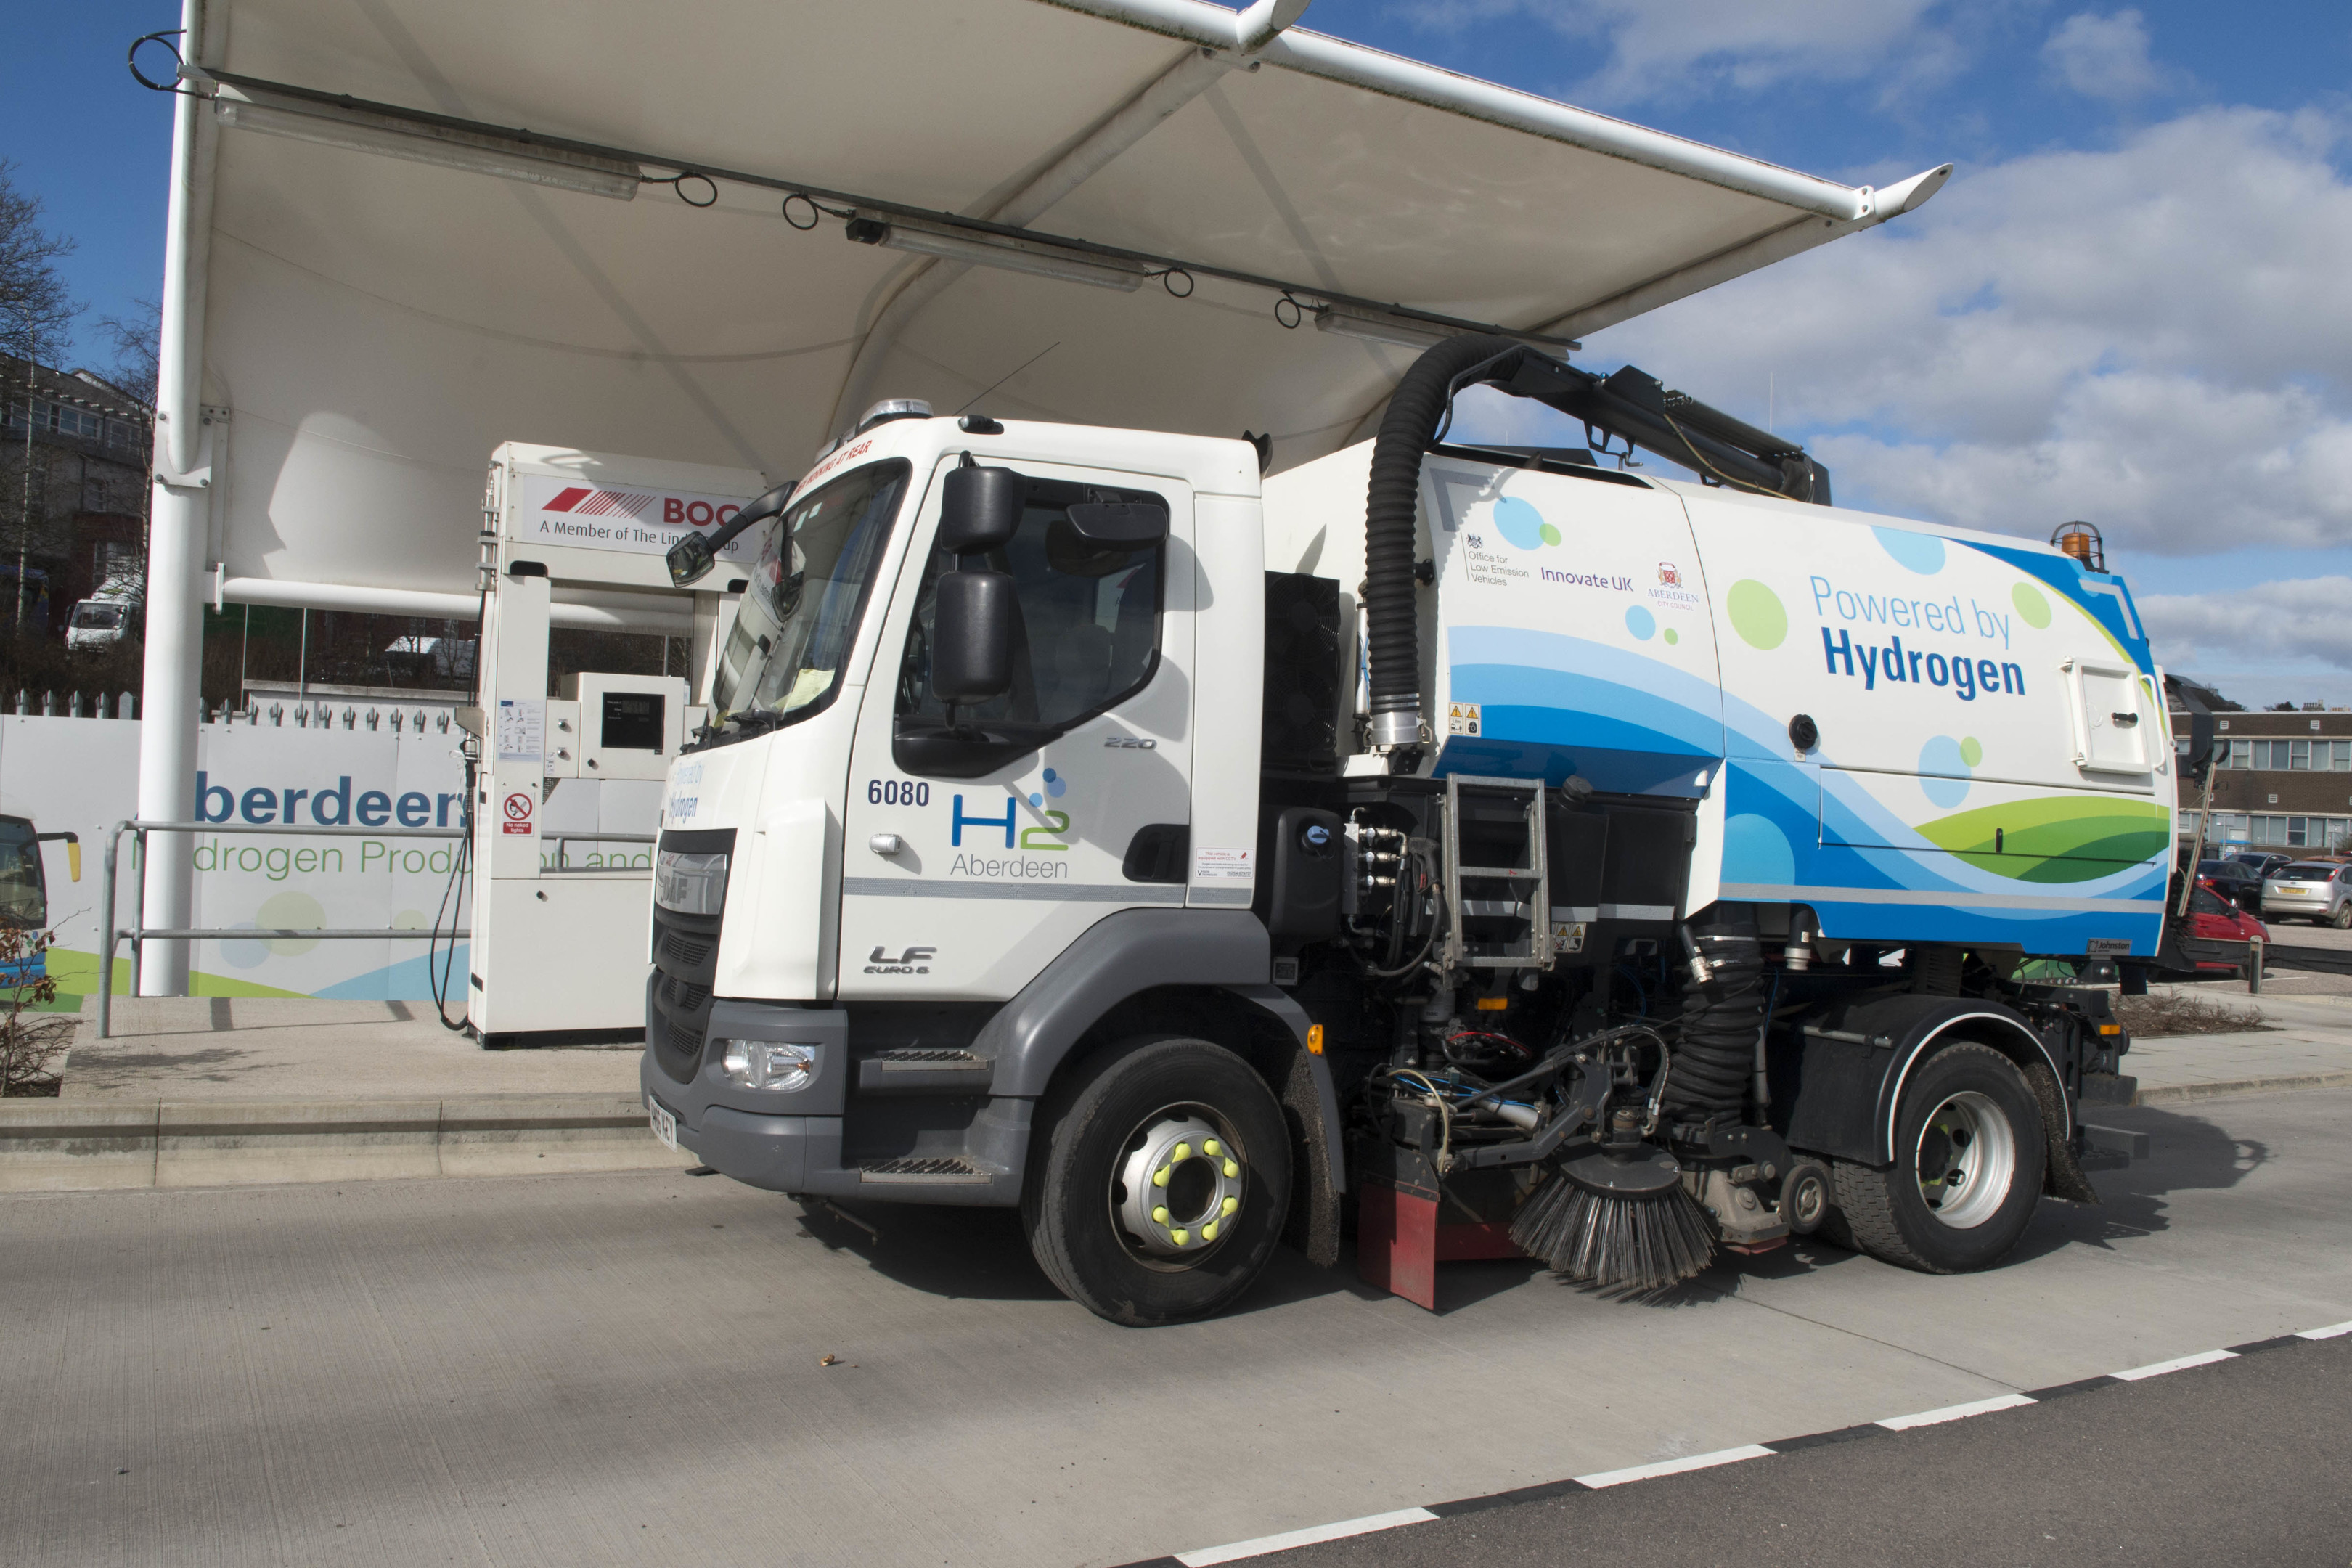 The Hydrogen powered road sweeper.